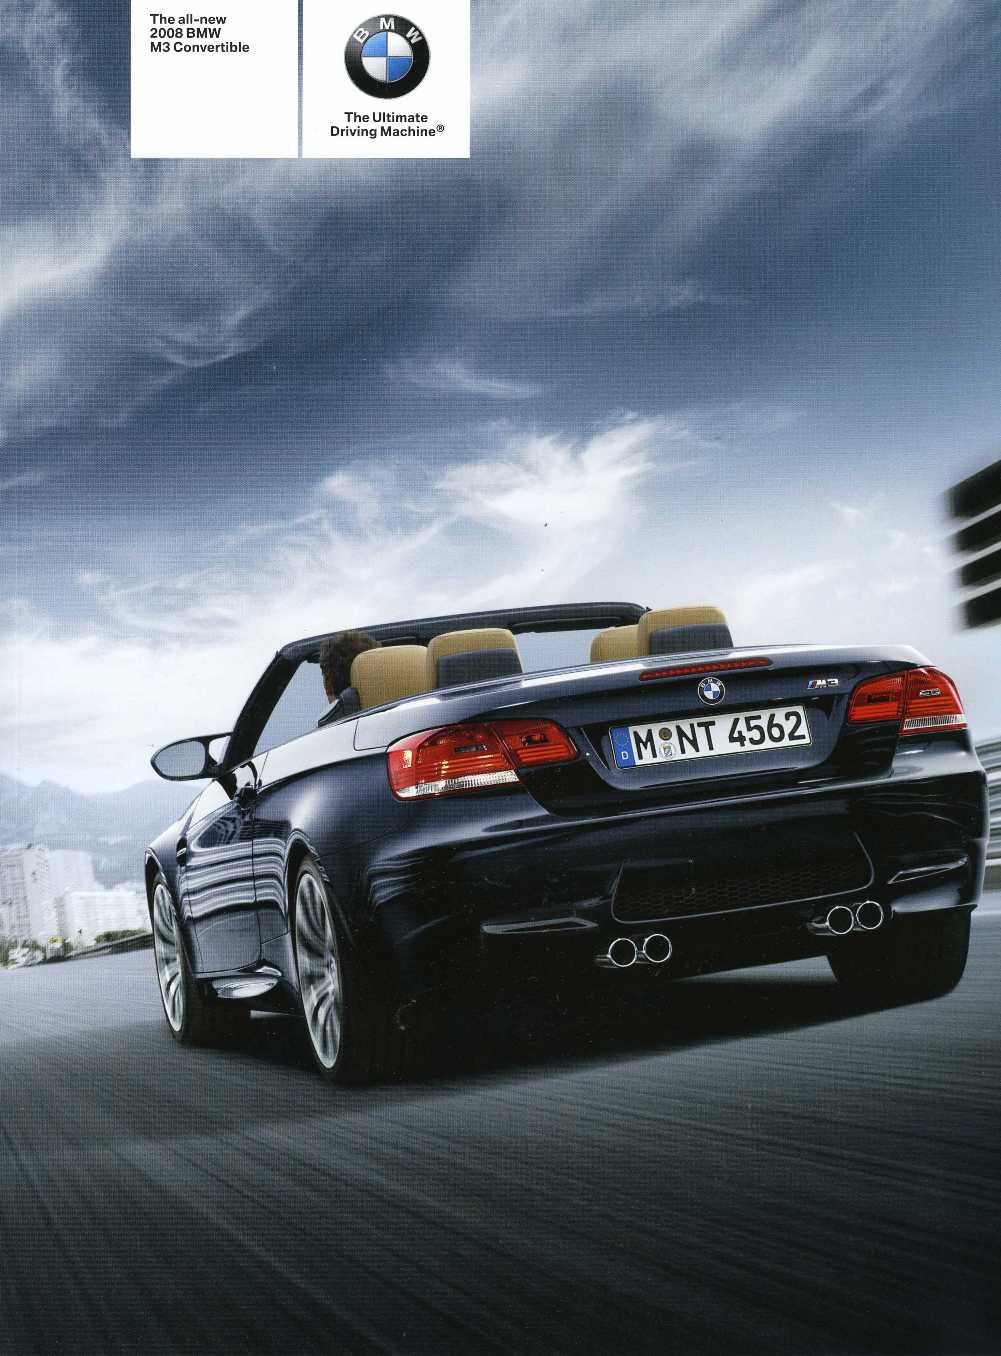 Brochure - The all-new 2008 BMW M3 Convertible - E93 Brochure (2nd version)